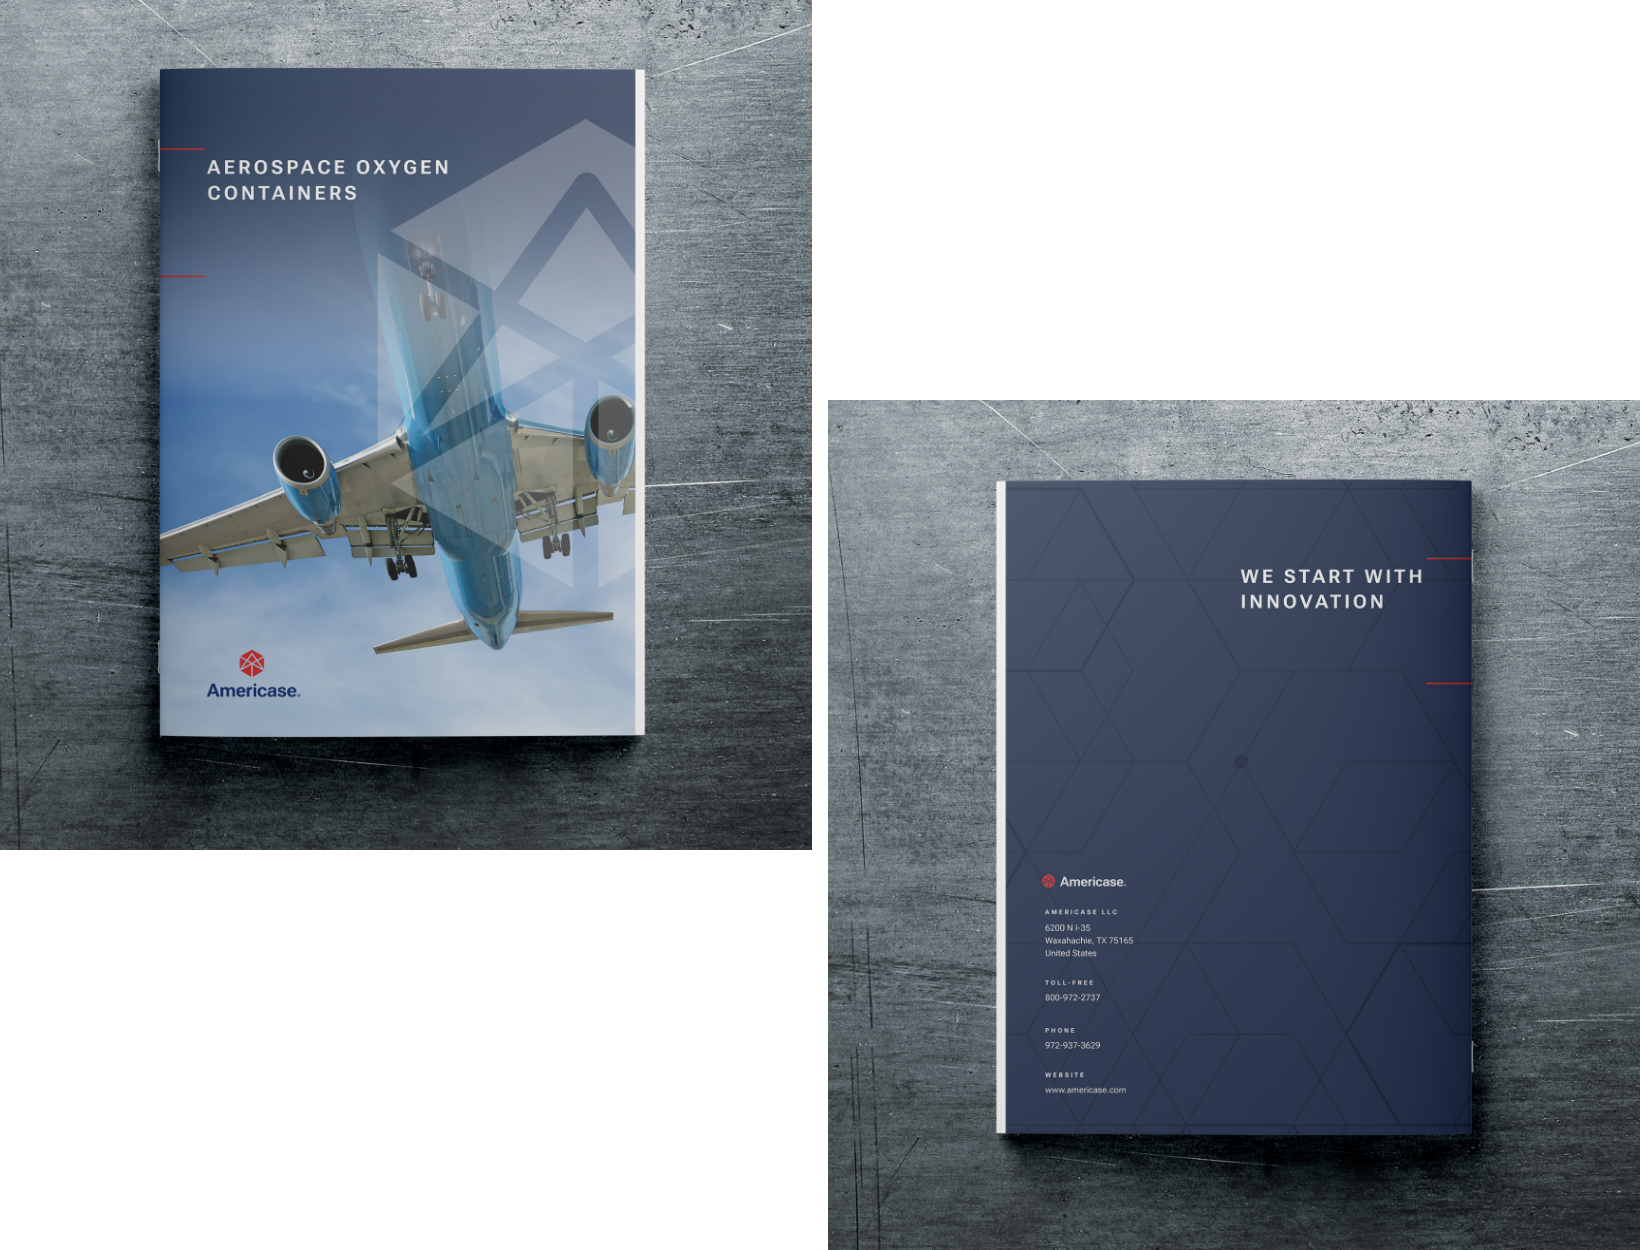 (Left) Photo of Airplane on Americase Brochure cover page. 